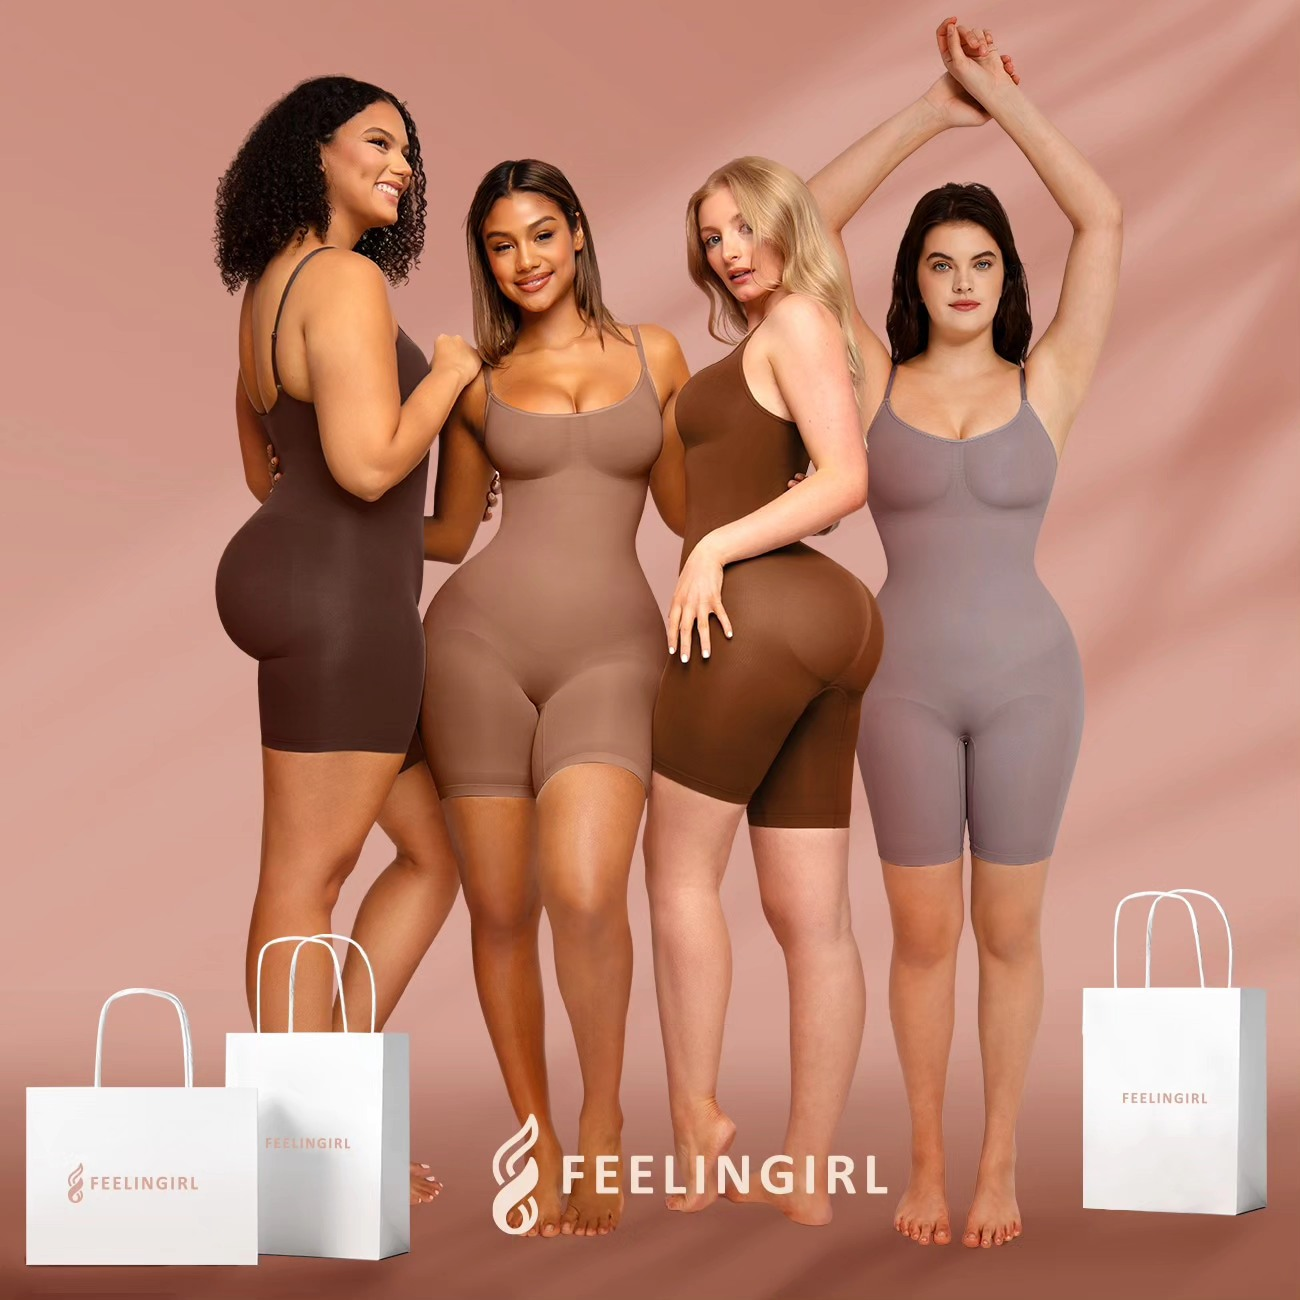 Feelingirl's Slimming Bodysuits for Confidence Building: Embrace Your Body and Feel Amazing